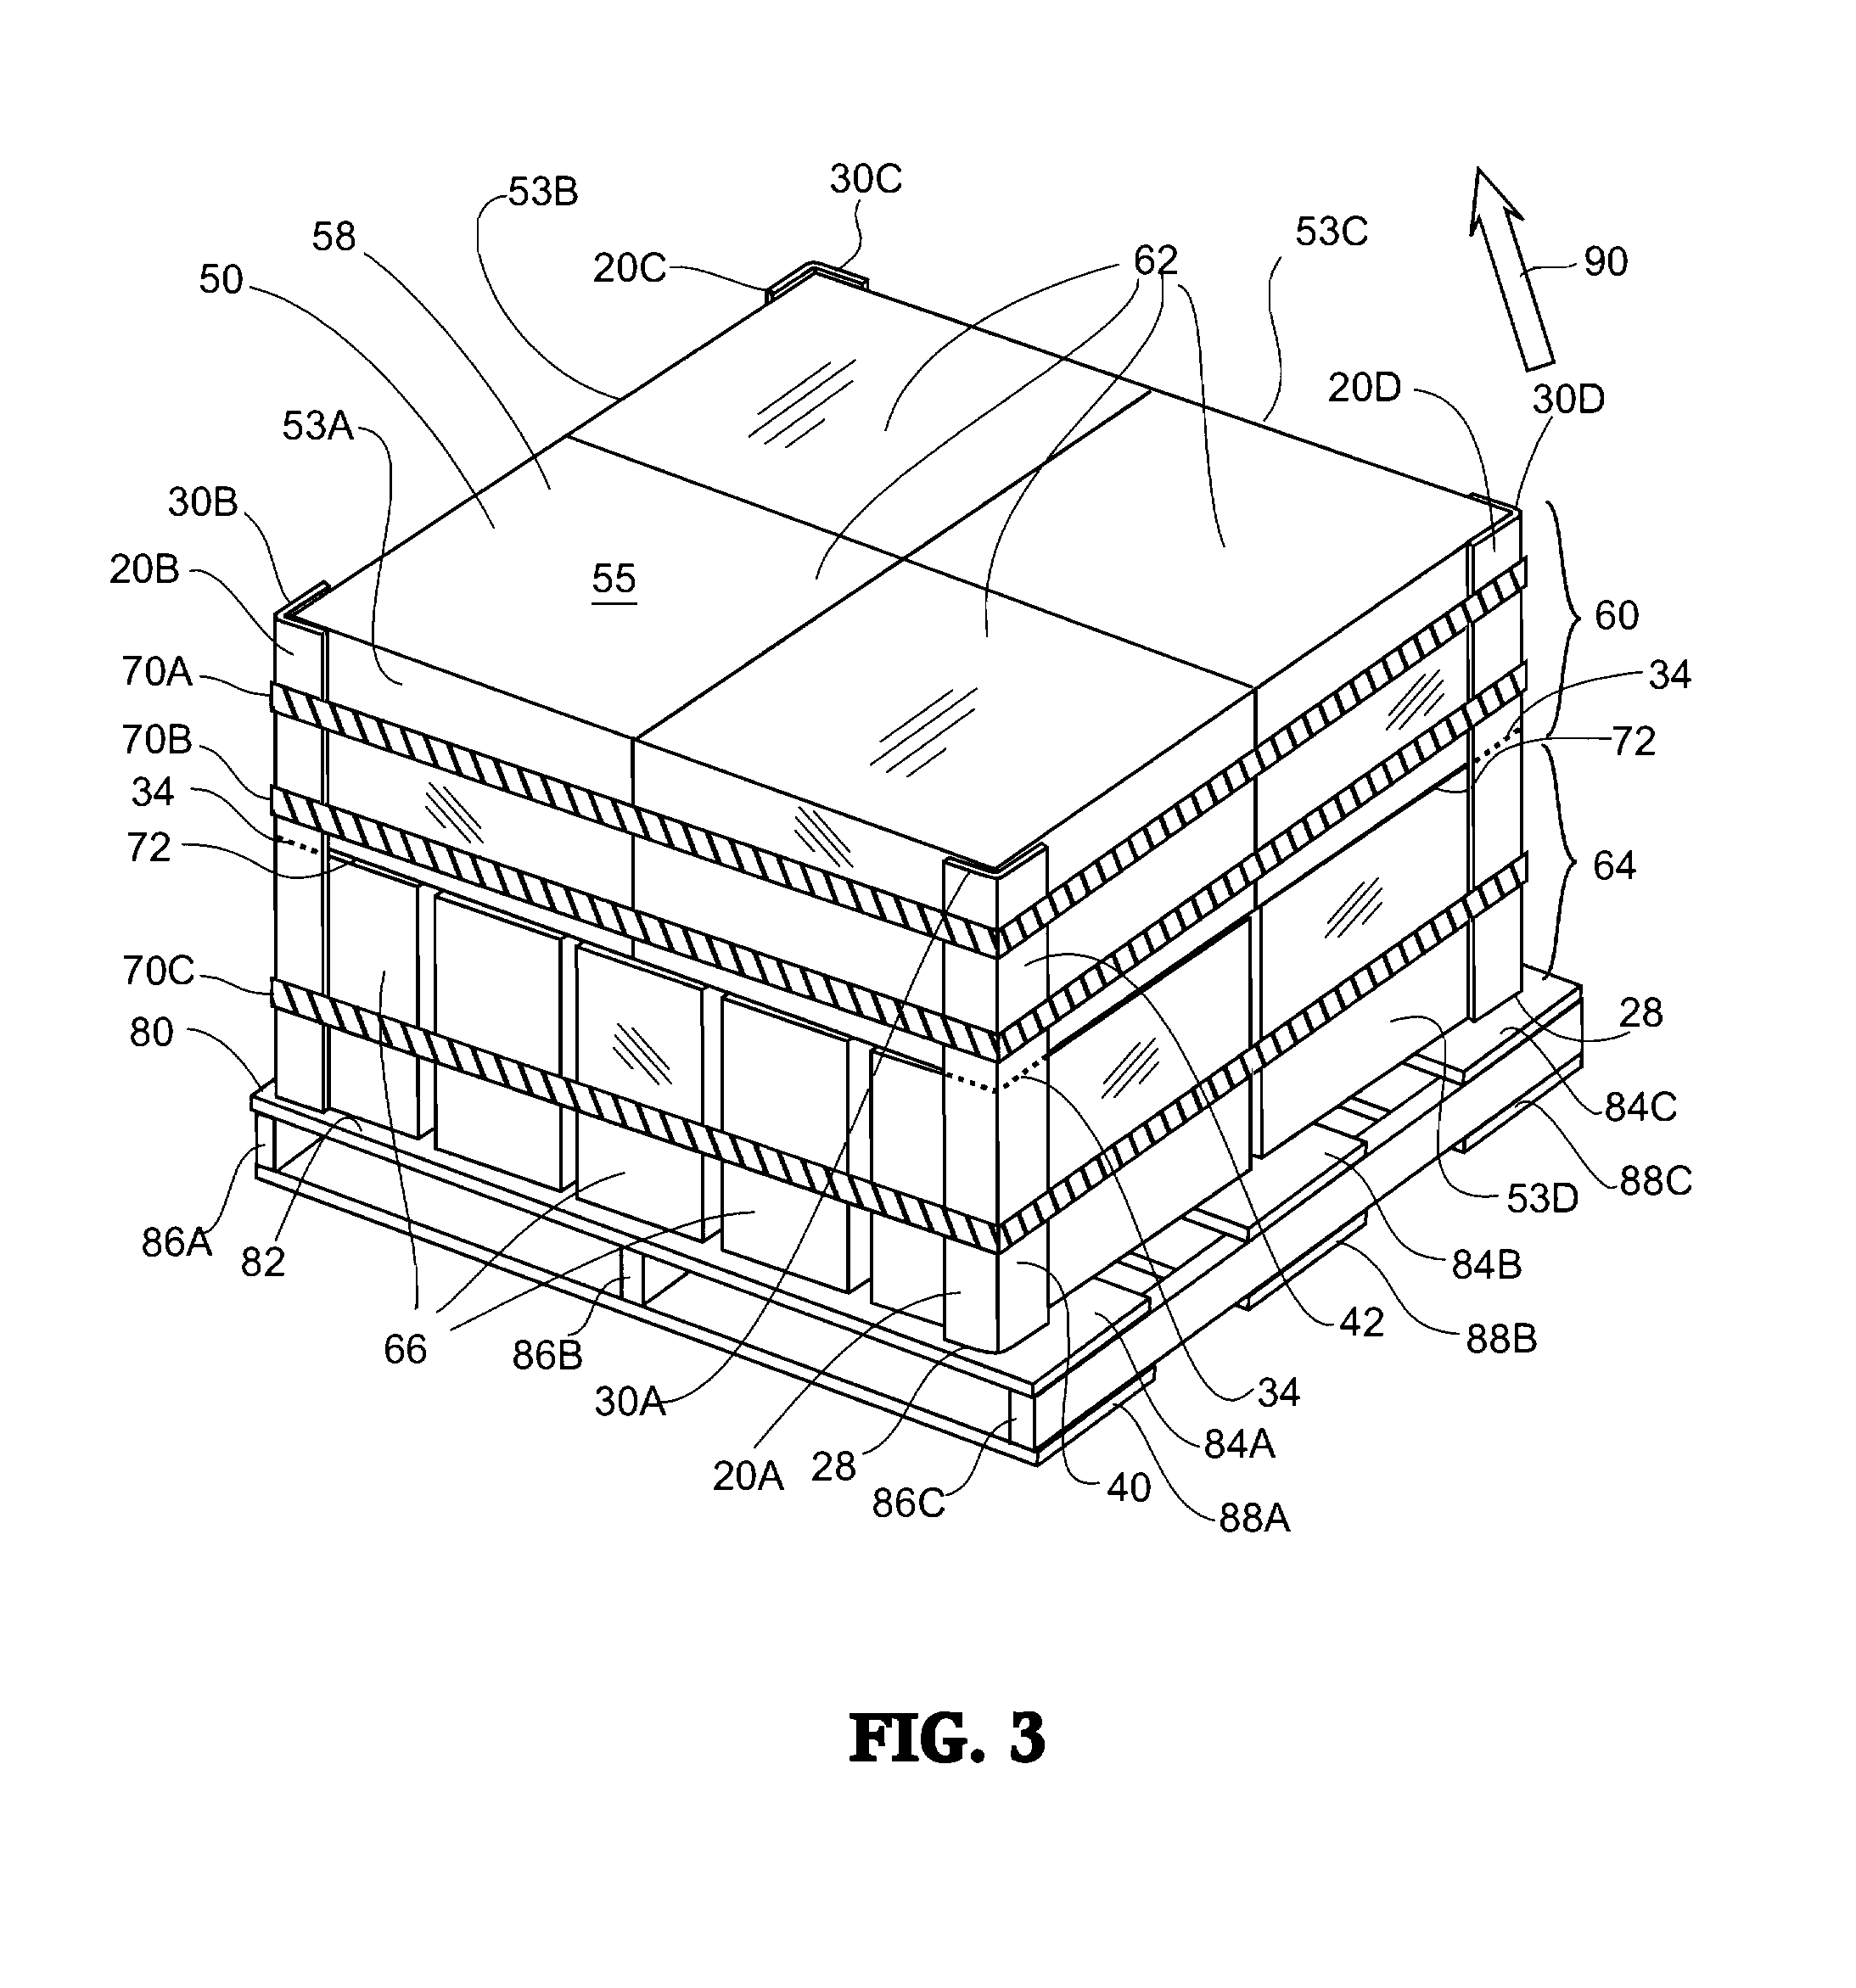 Products and method for packaging multiple rows of products